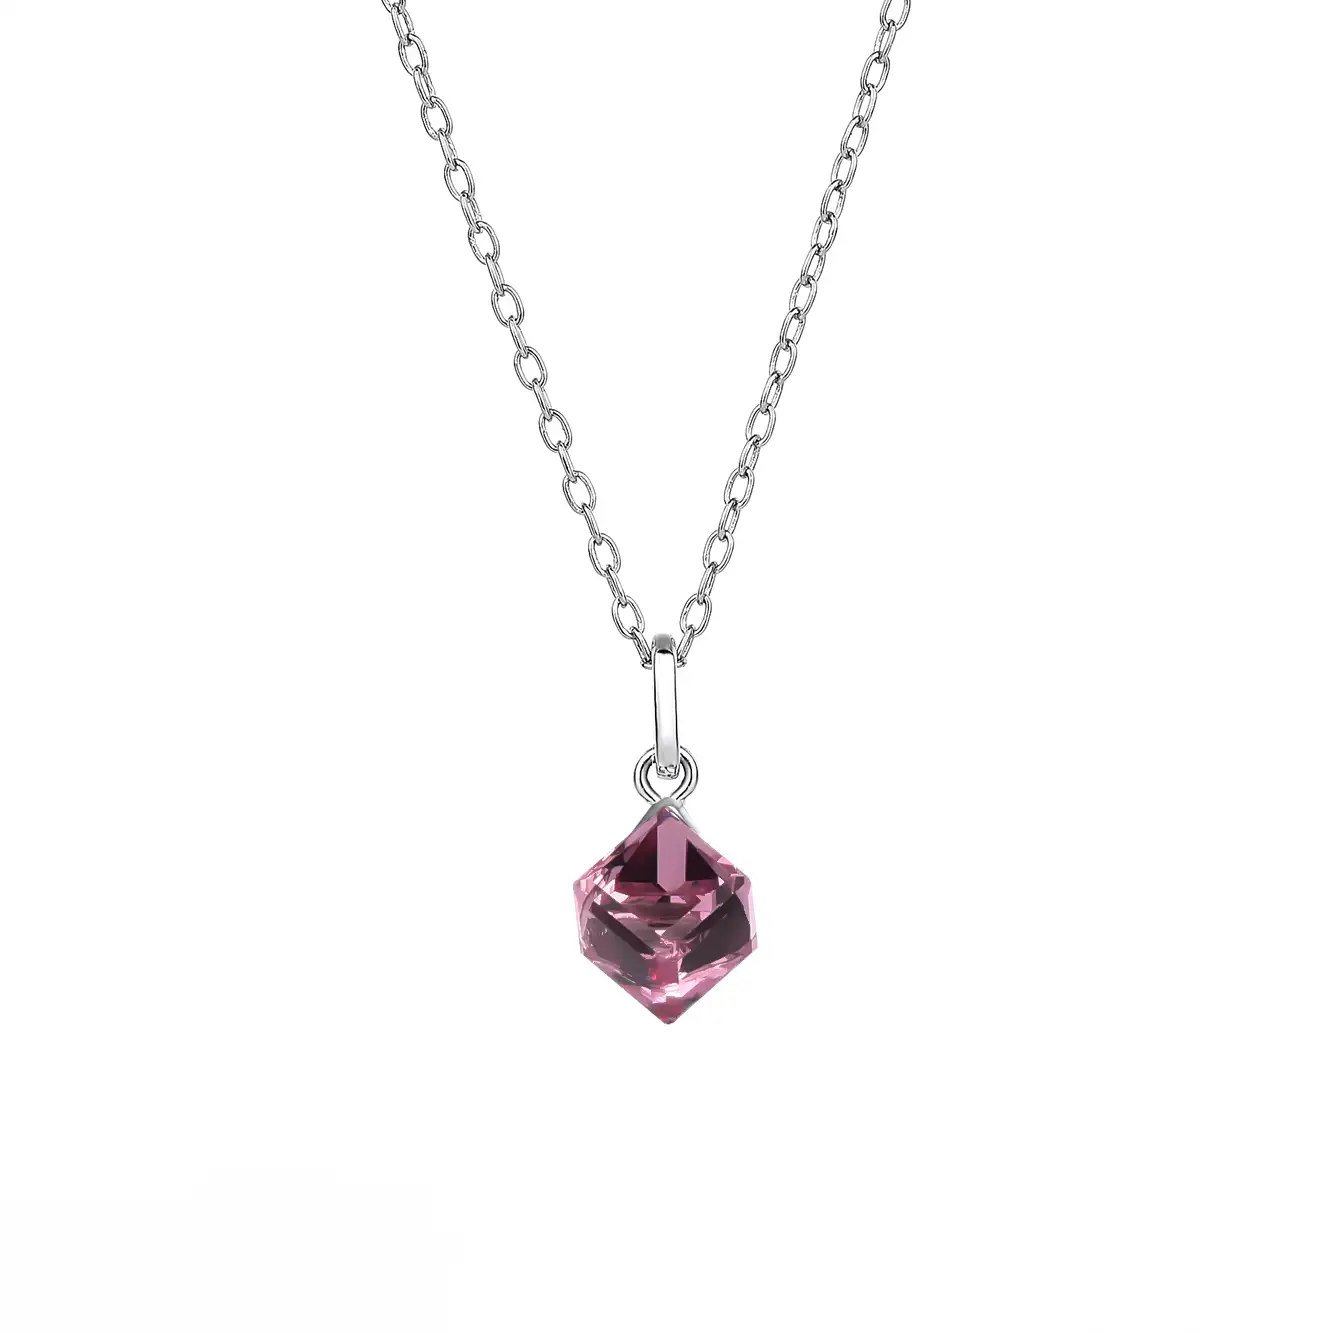 Crystals from Swarovski Cube Cubic Zirconia Pendant Necklace 80200090